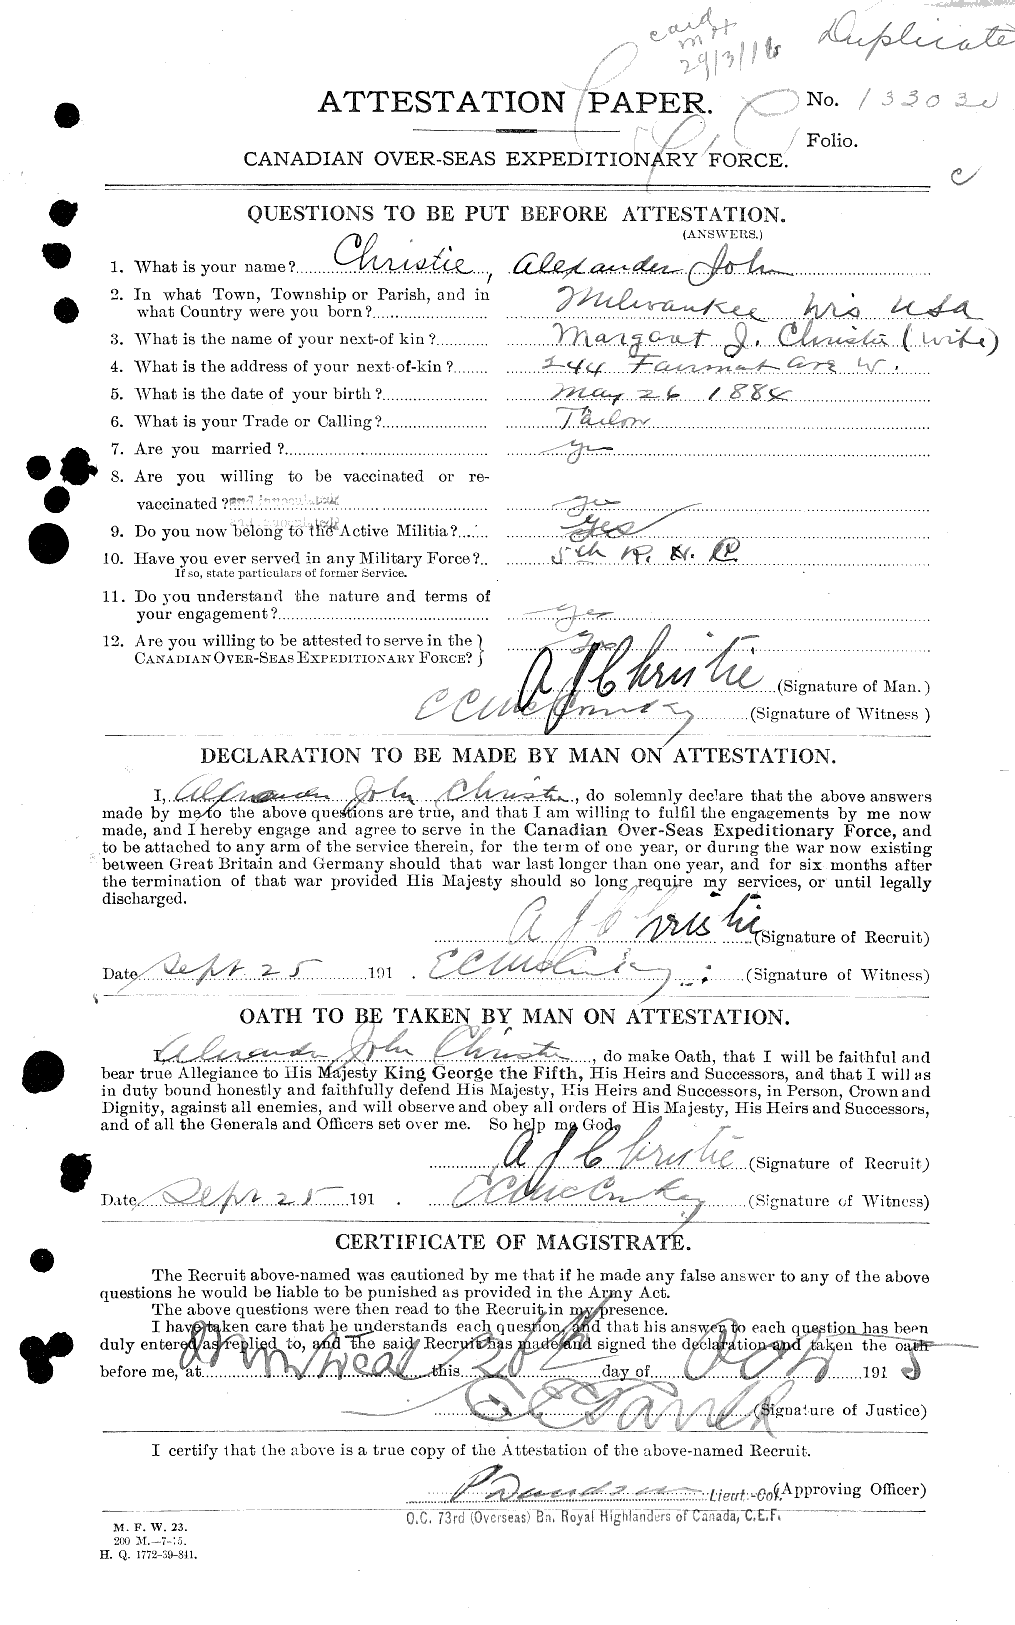 Personnel Records of the First World War - CEF 021864a